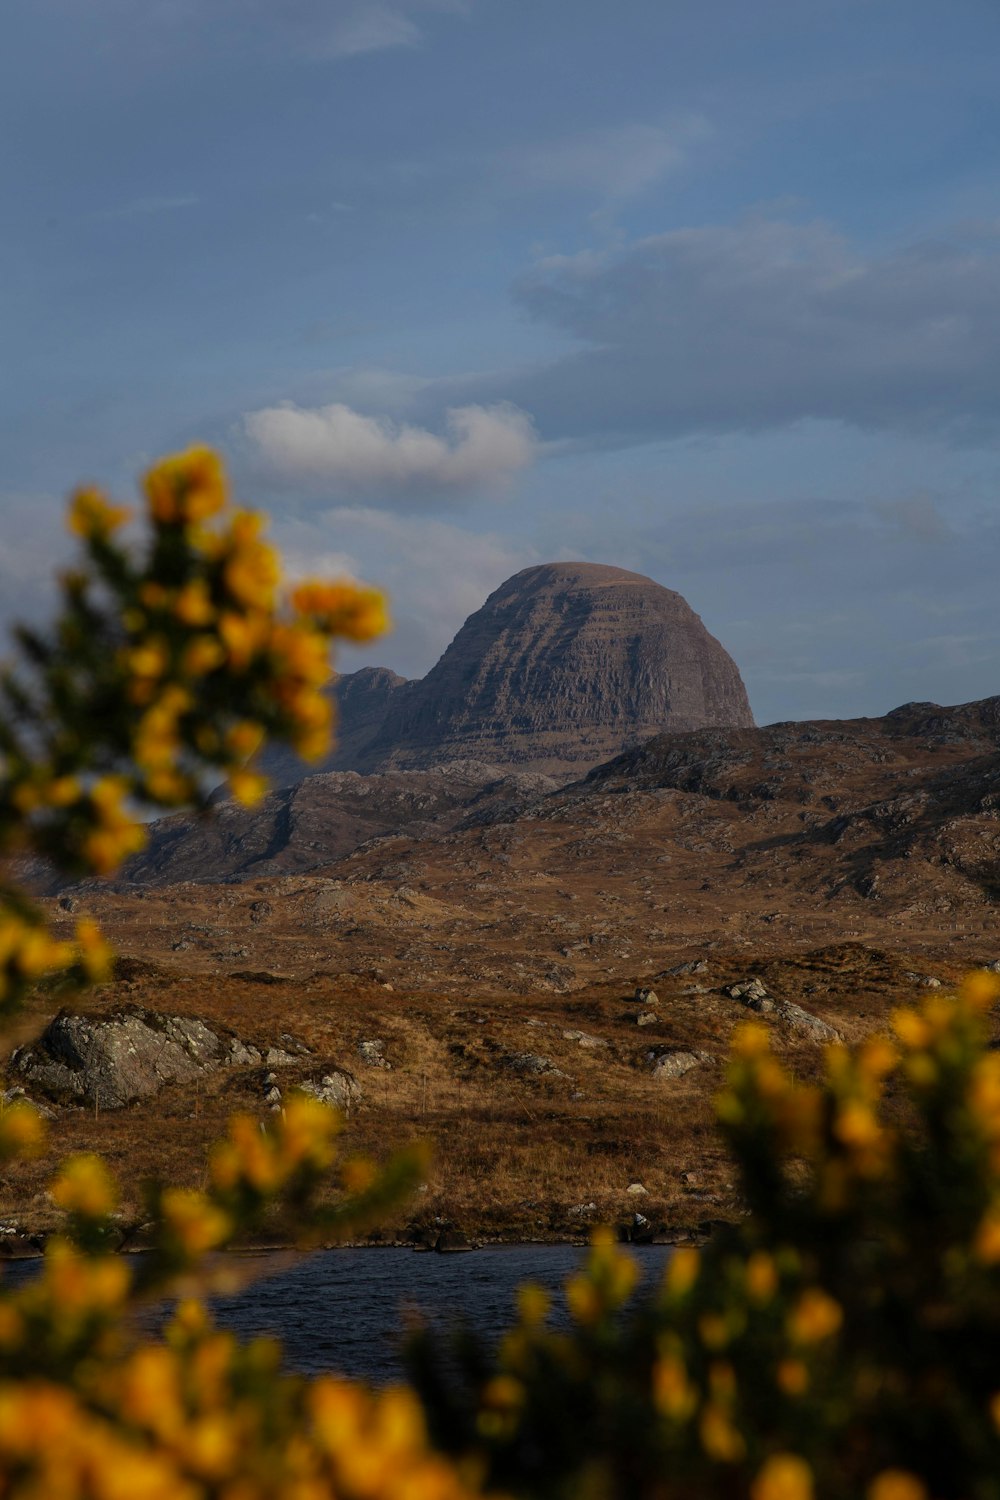 a view of a mountain with yellow flowers in the foreground